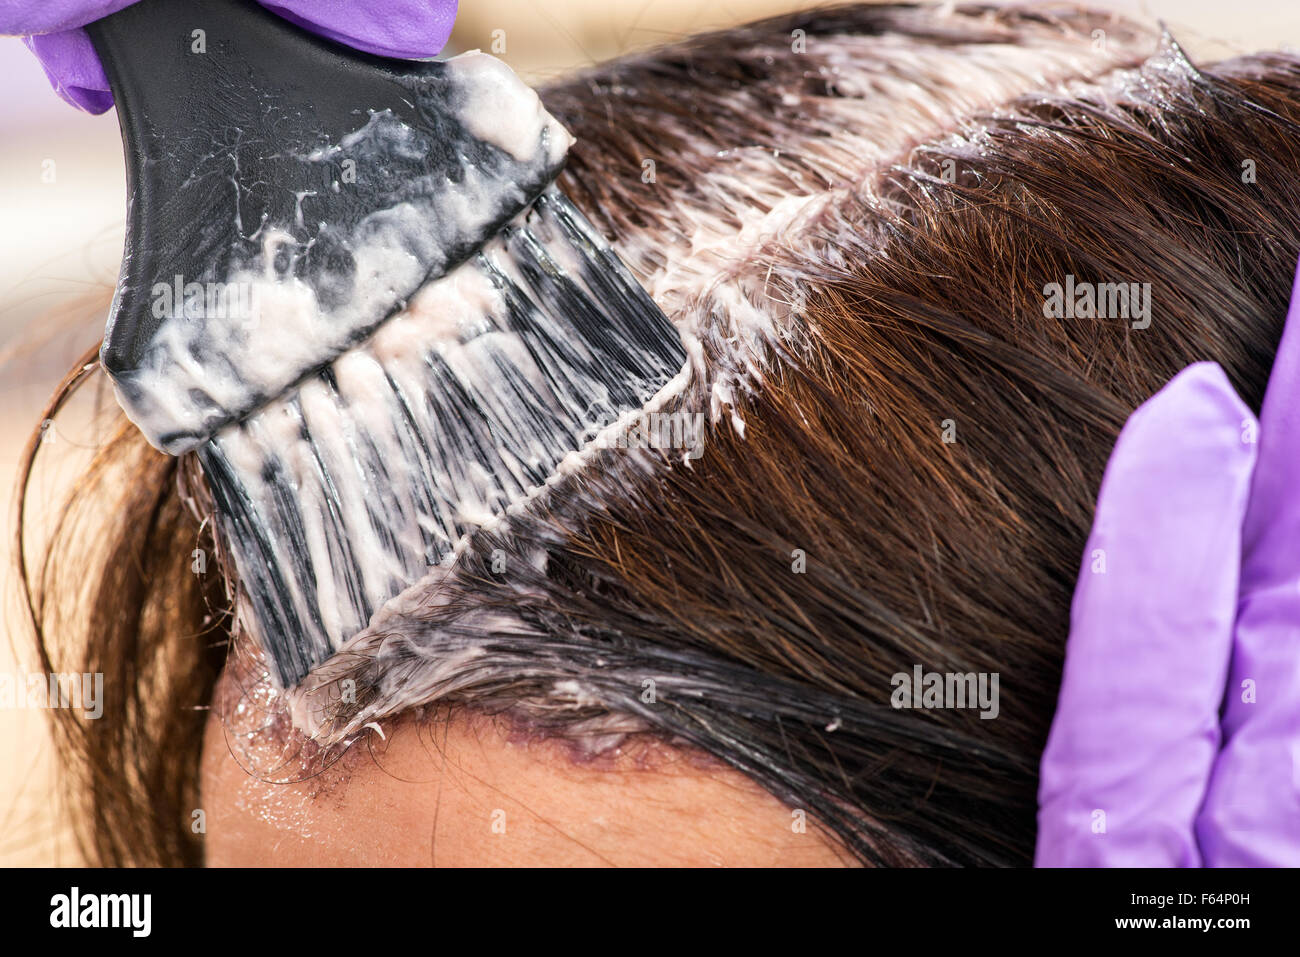 Hairdresser applying a color tint to the brown hair of a female client in a salon using a brush applicator, close up view Stock Photo